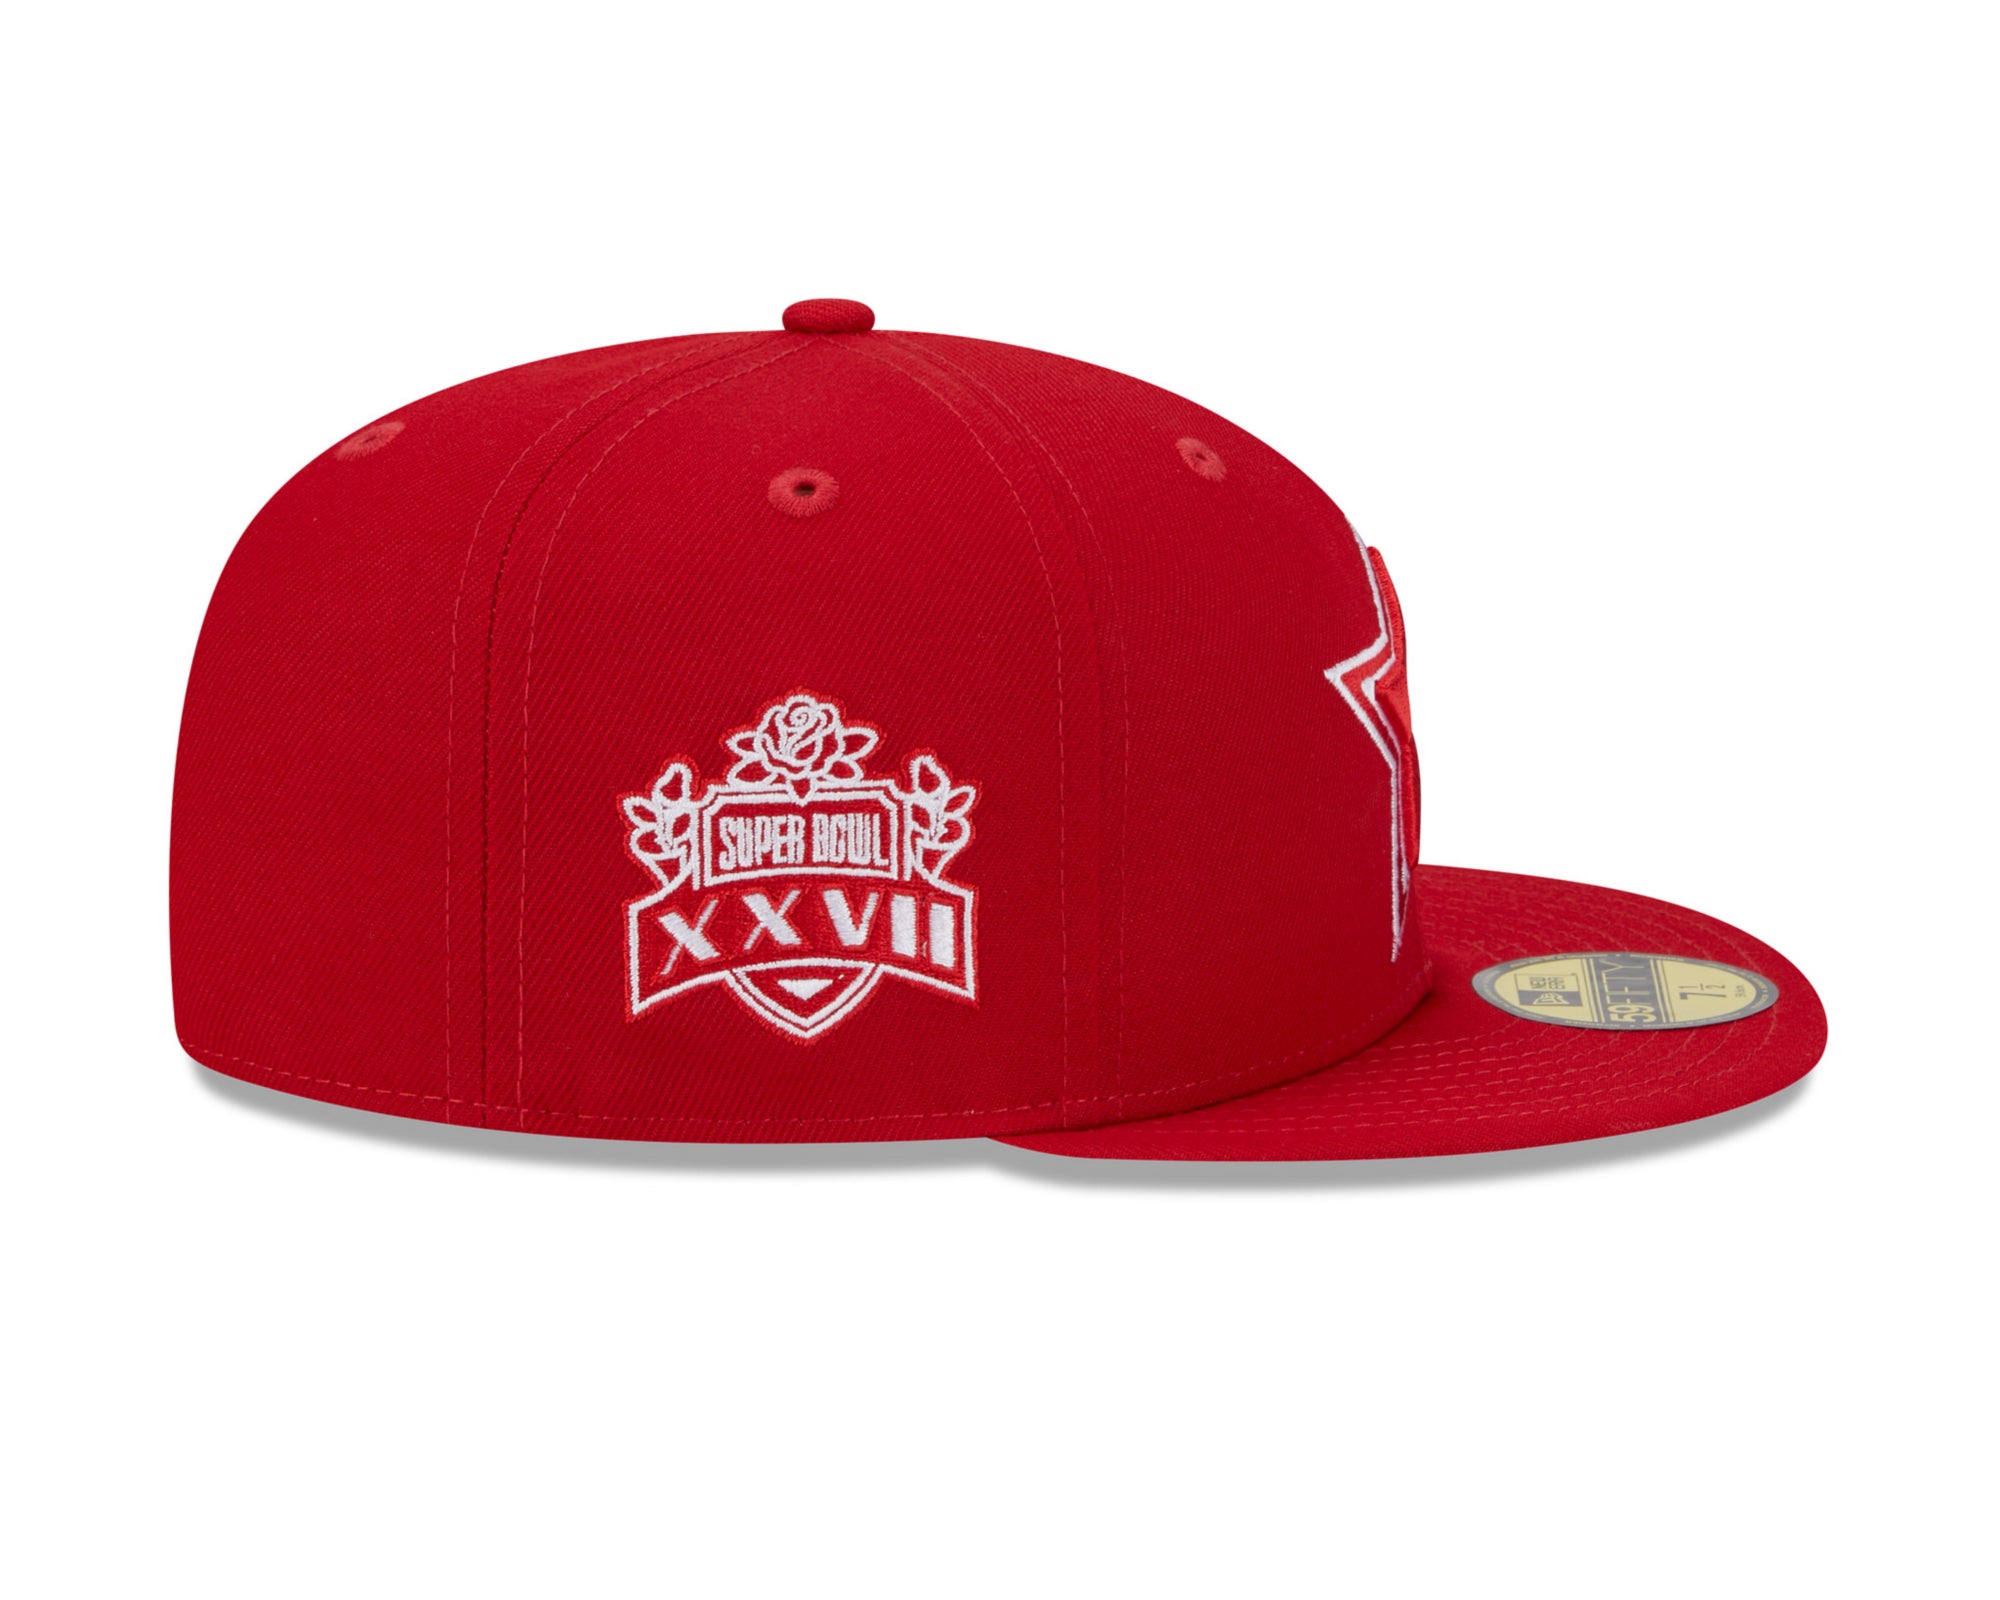 all red dallas cowboys hat